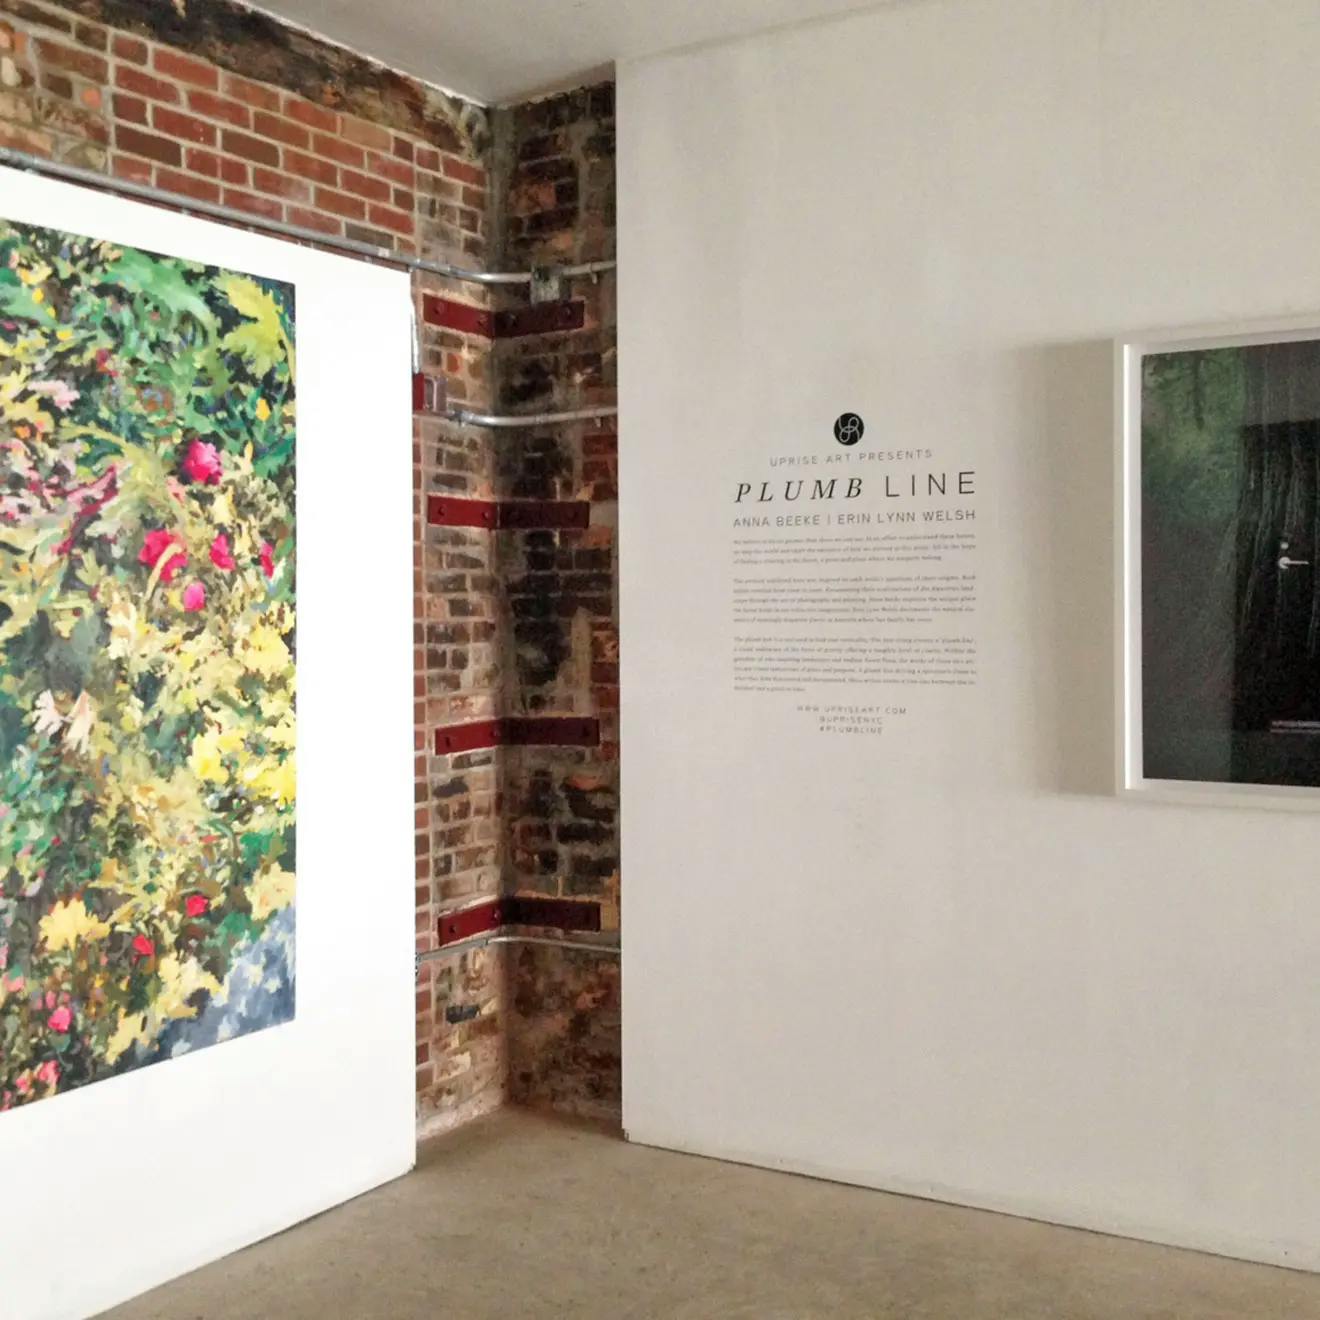 Artwork installed as part of Plumb Line, one of Uprise Art's Exhibitions in New York, NY.